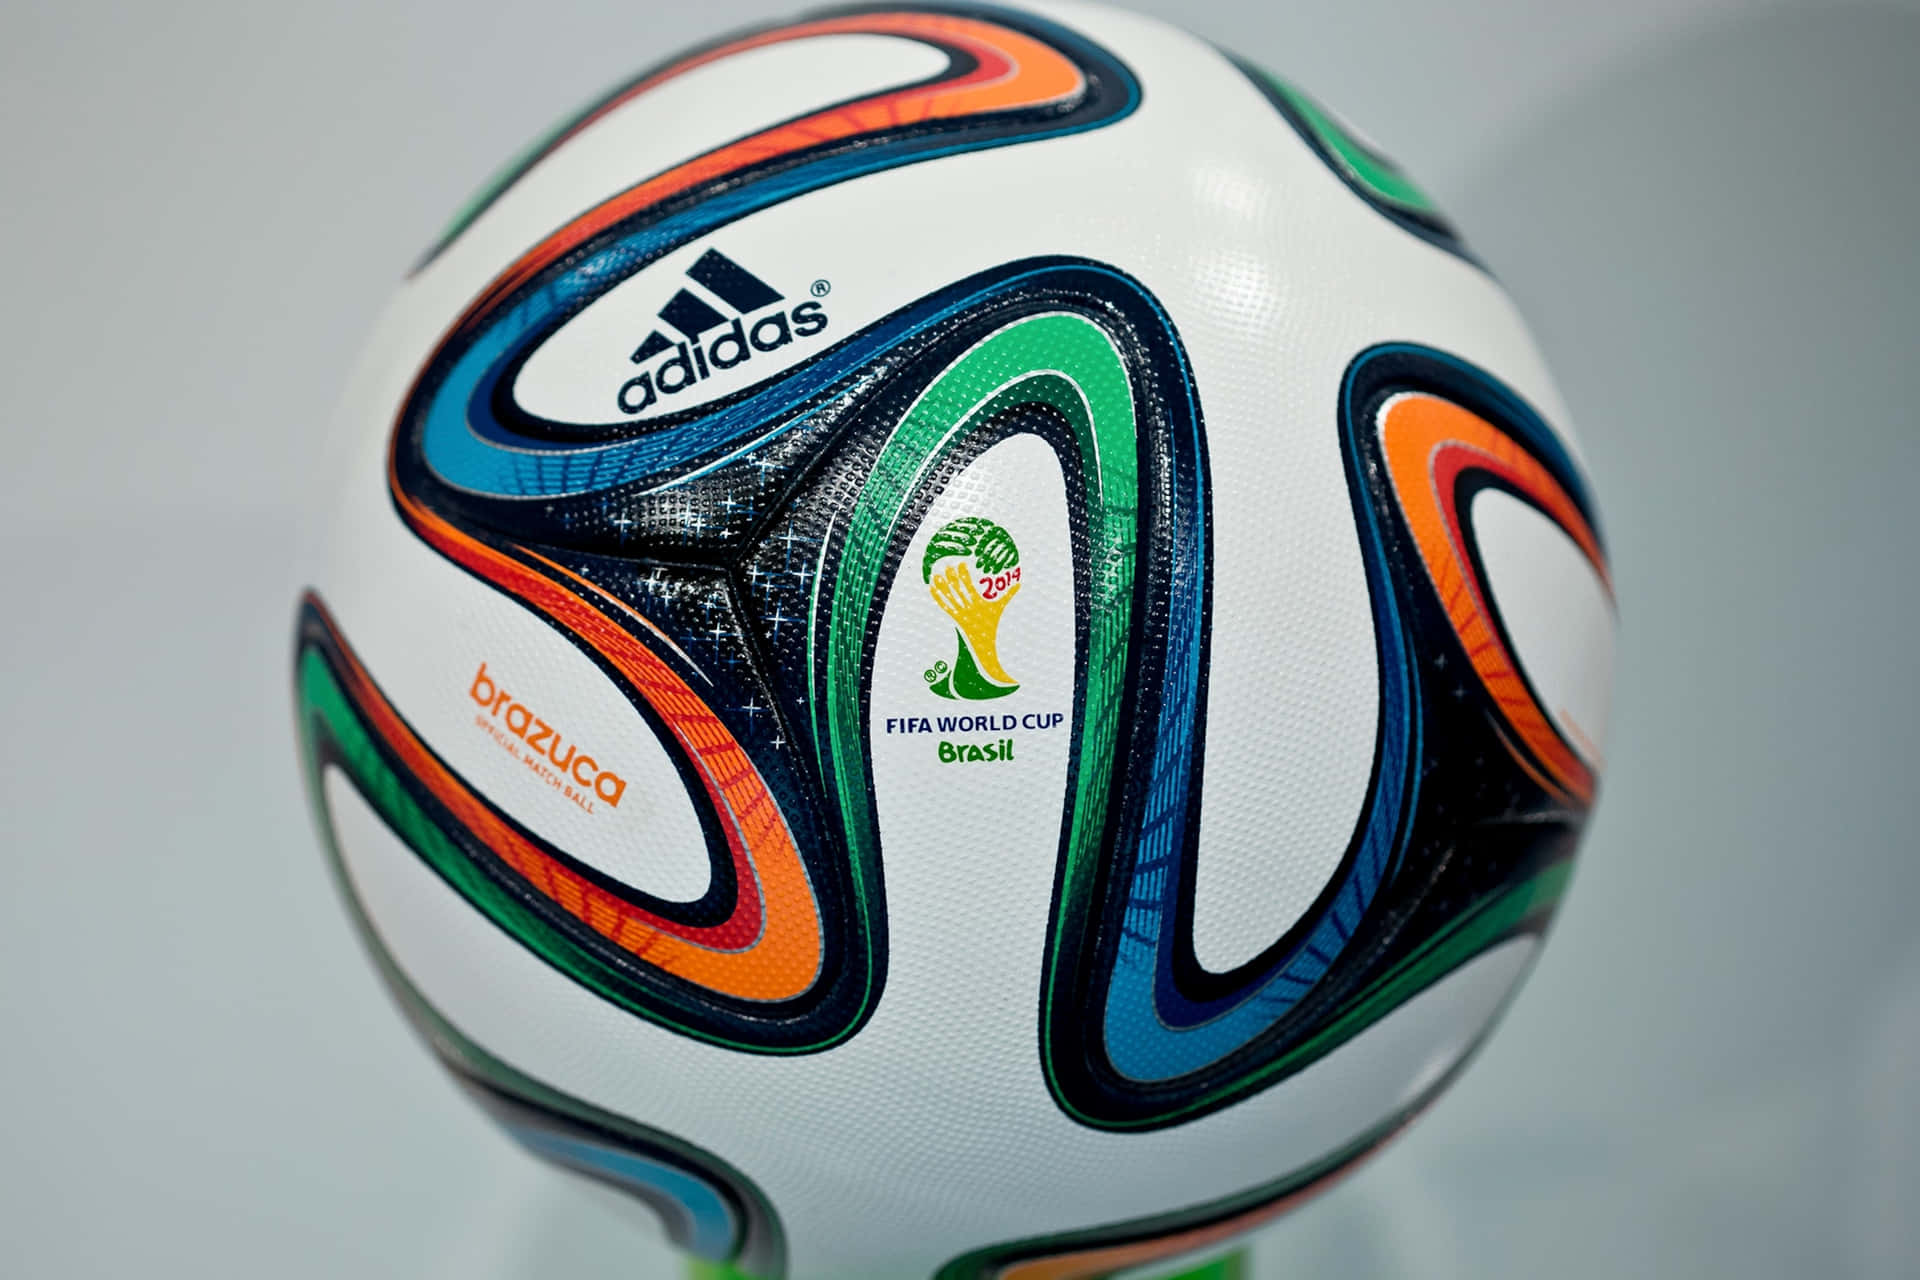 Adidas Brazuca Soccer Ball Picture